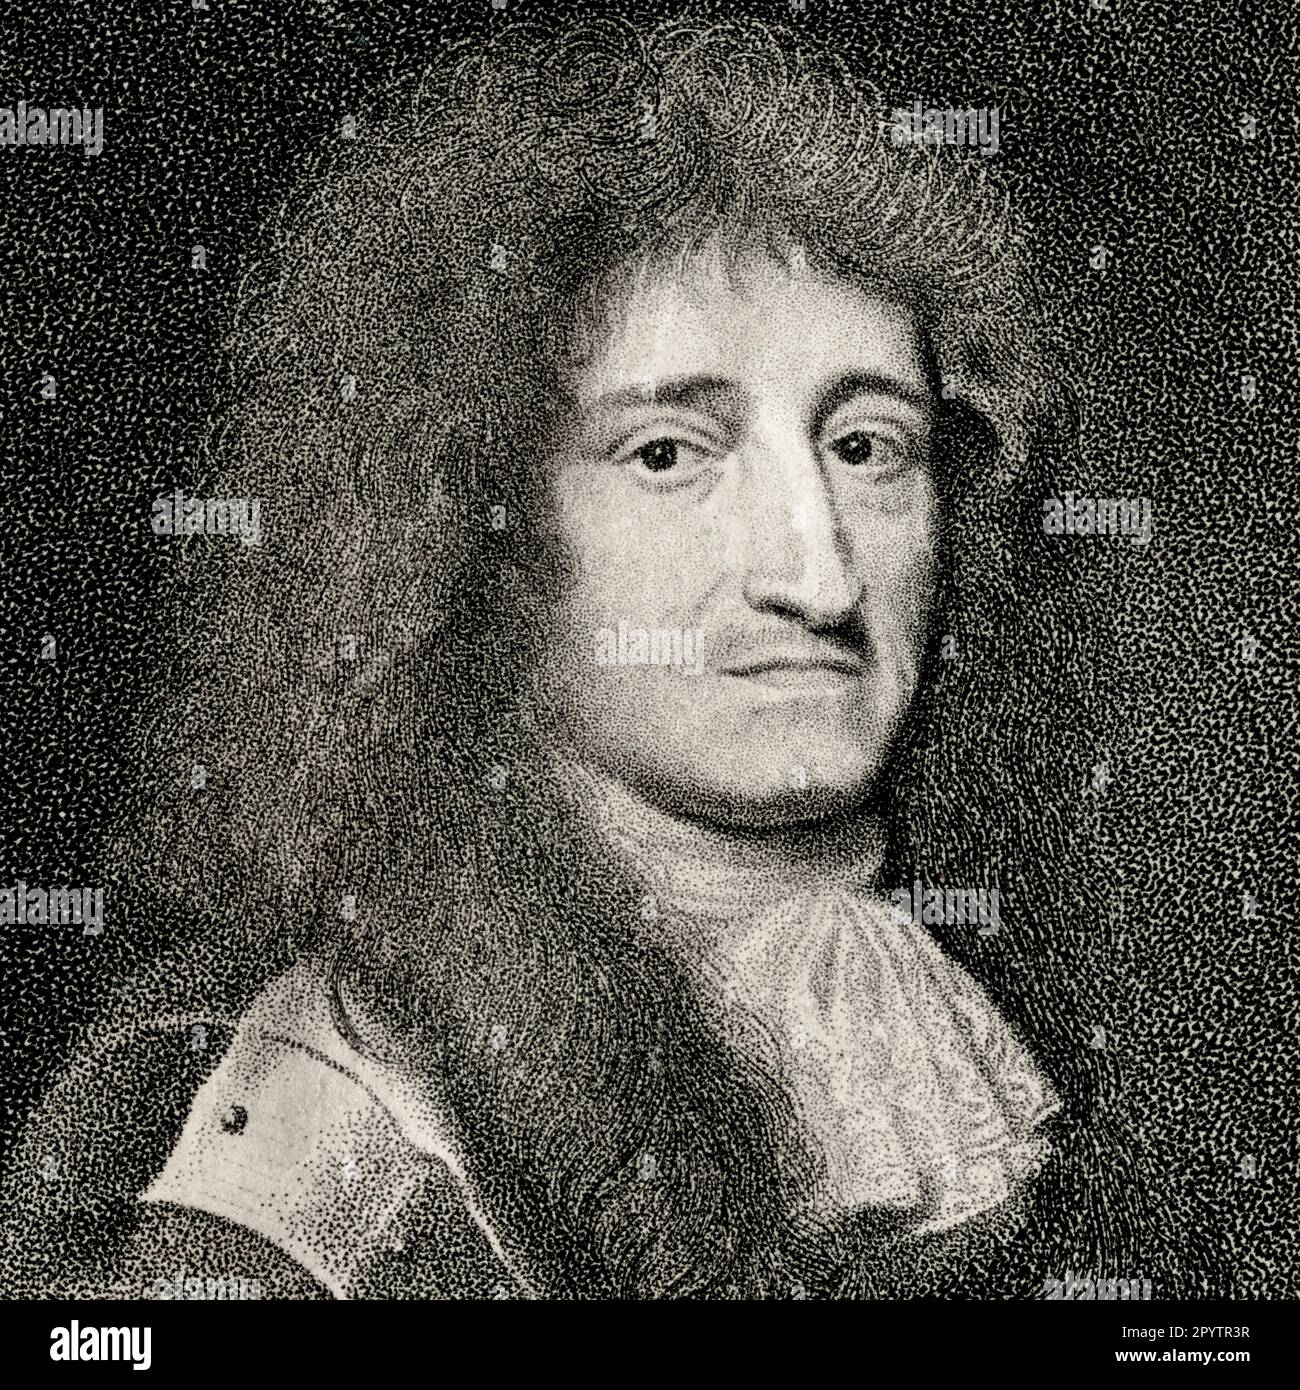 Prince Rupert of the Rhine (1619-1682), Count Palatine and 1st Duke of Cumberland, a nephew of King Charles I of England and Royalist cavalry commander during the English Civil War.  Square detail of a stipple engraving created in the 1700s by John Keyse Sherwin (1751-1790), after a miniature watercolour portrait by Samuel Cooper (1609-1672). Stock Photo